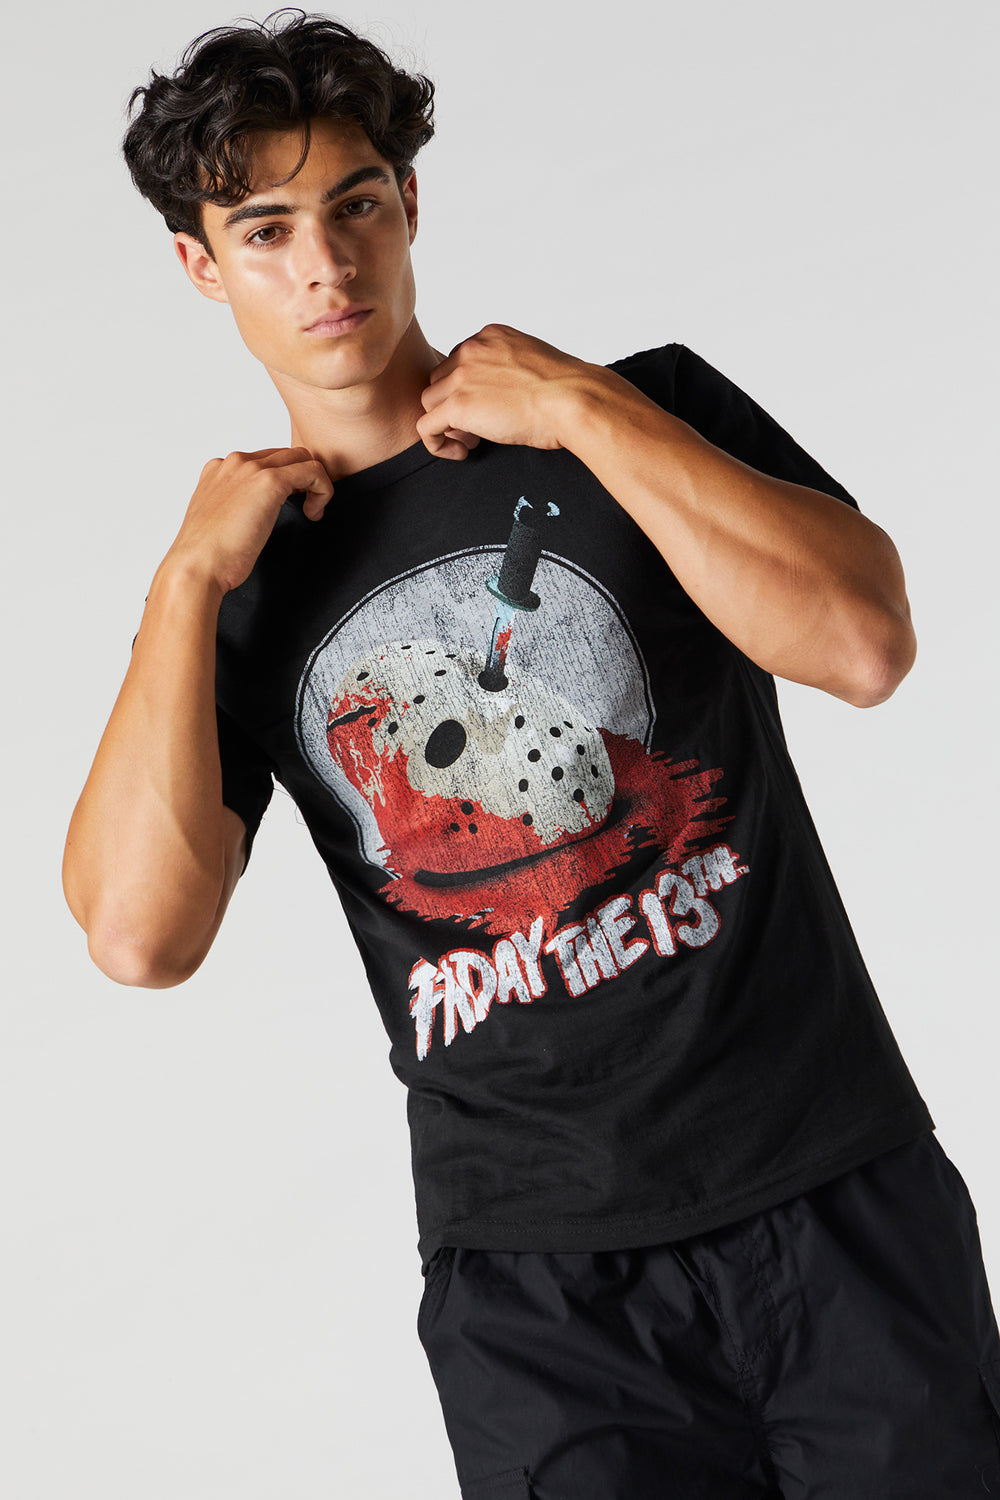 Friday the 13th Graphic T-Shirt Friday the 13th Graphic T-Shirt 1